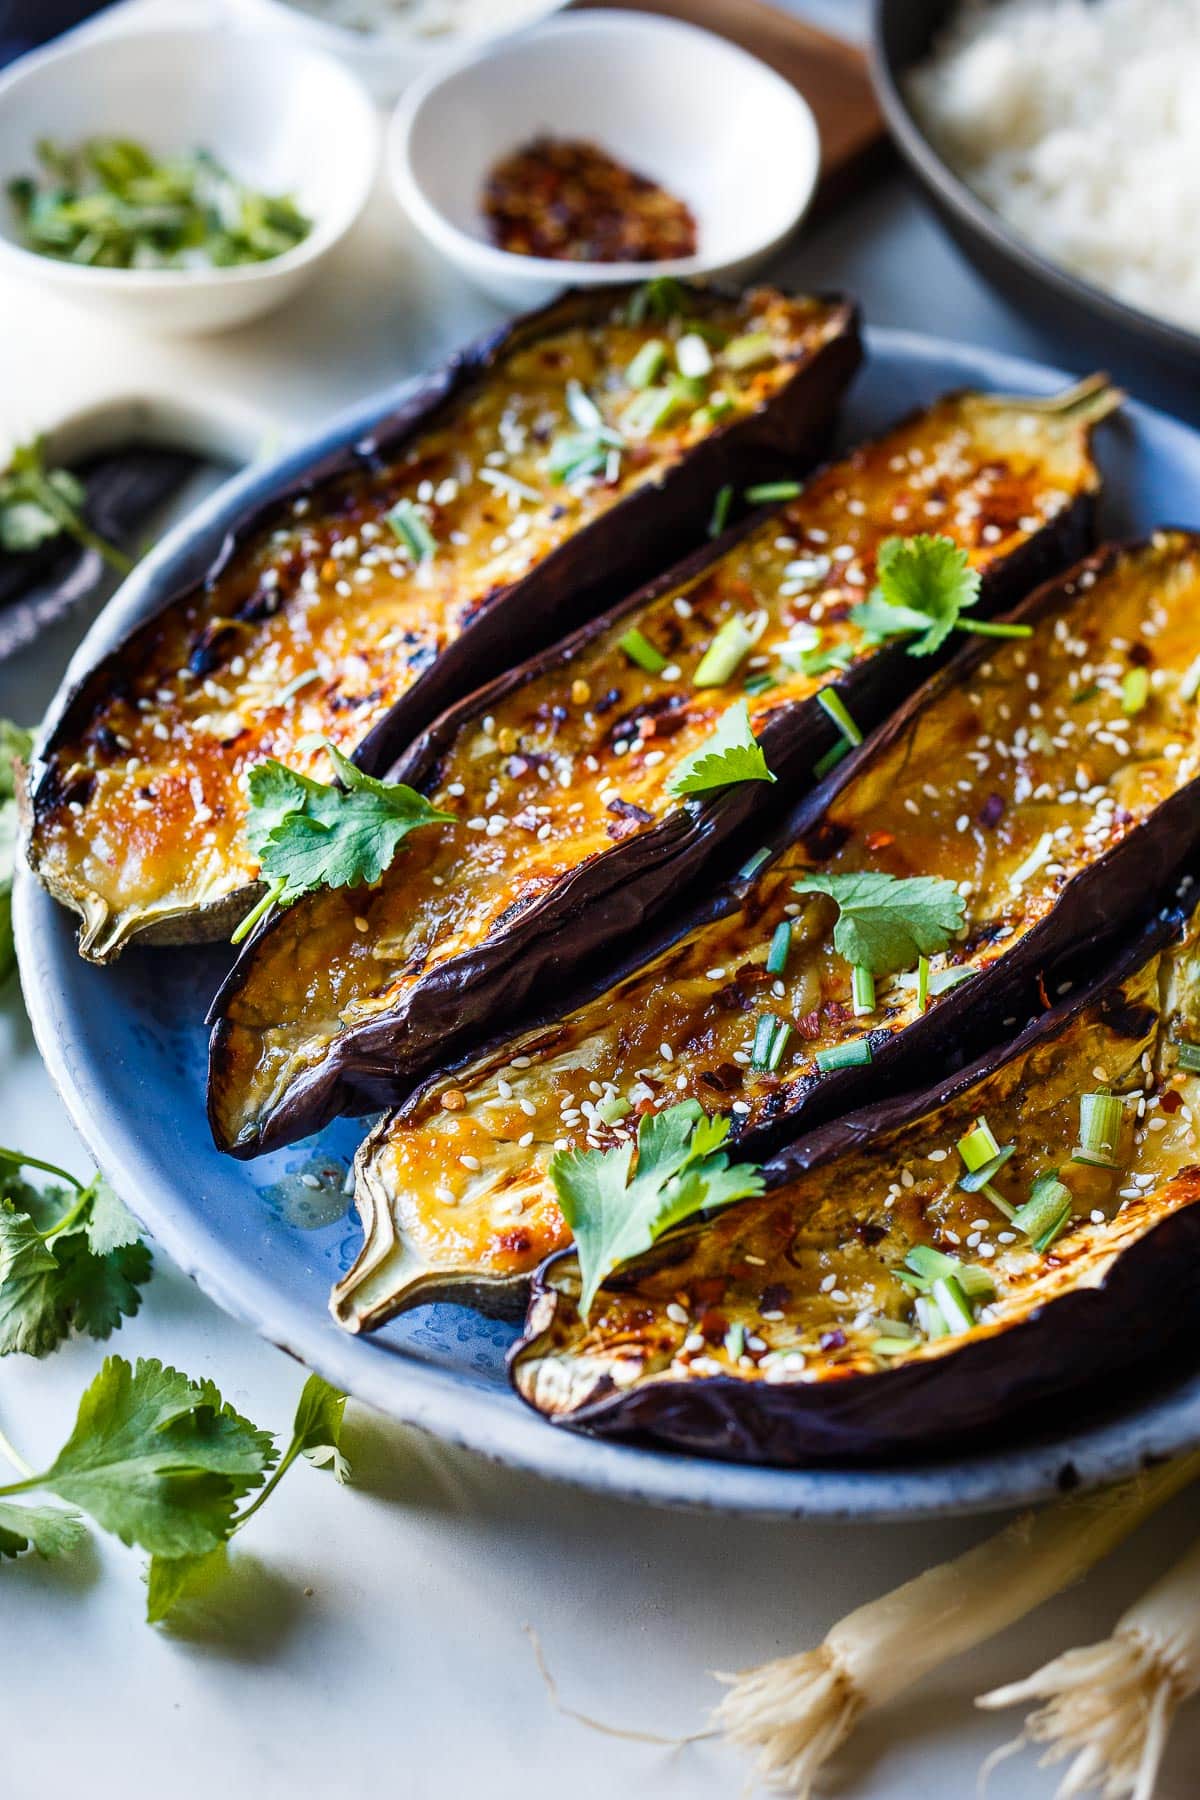 Miso Roasted Eggplant is caramelized with an umami-rich miso glaze. A simple vegan main, or savory side dish. 